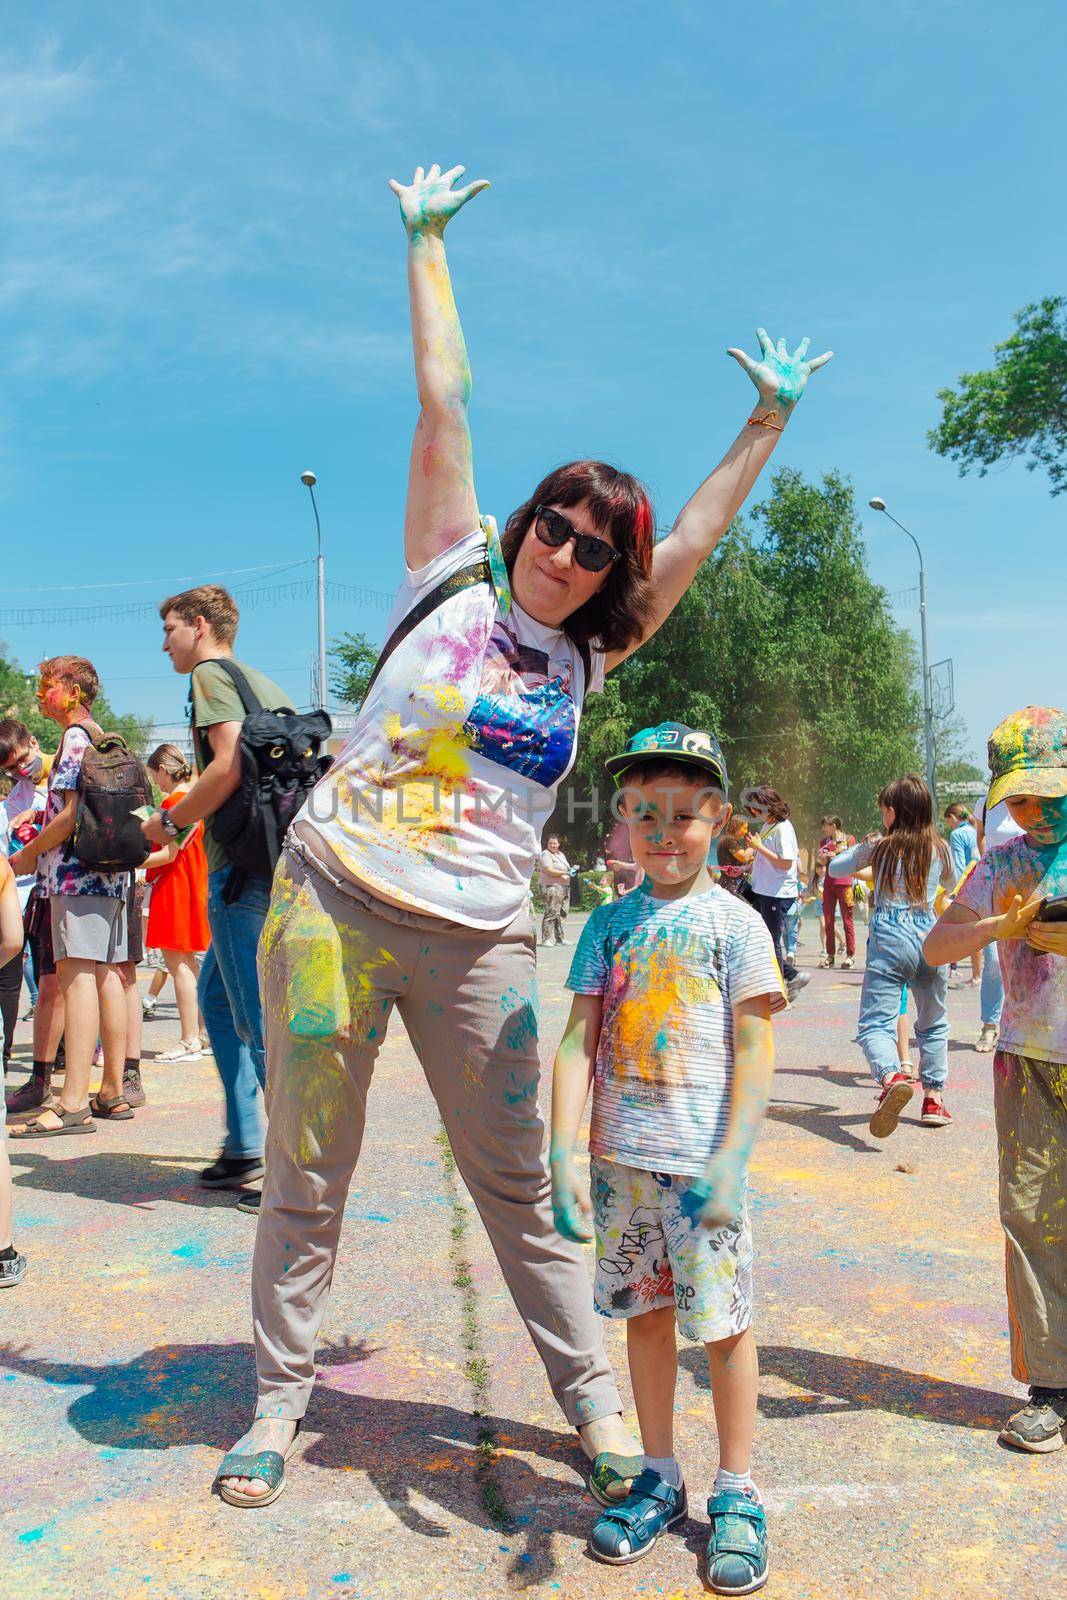 Novokuznetsk, Kemerovo region, Russia - June 12, 2022 :: Mother and son with colorful faces painted with holi powder having fun outdoors.